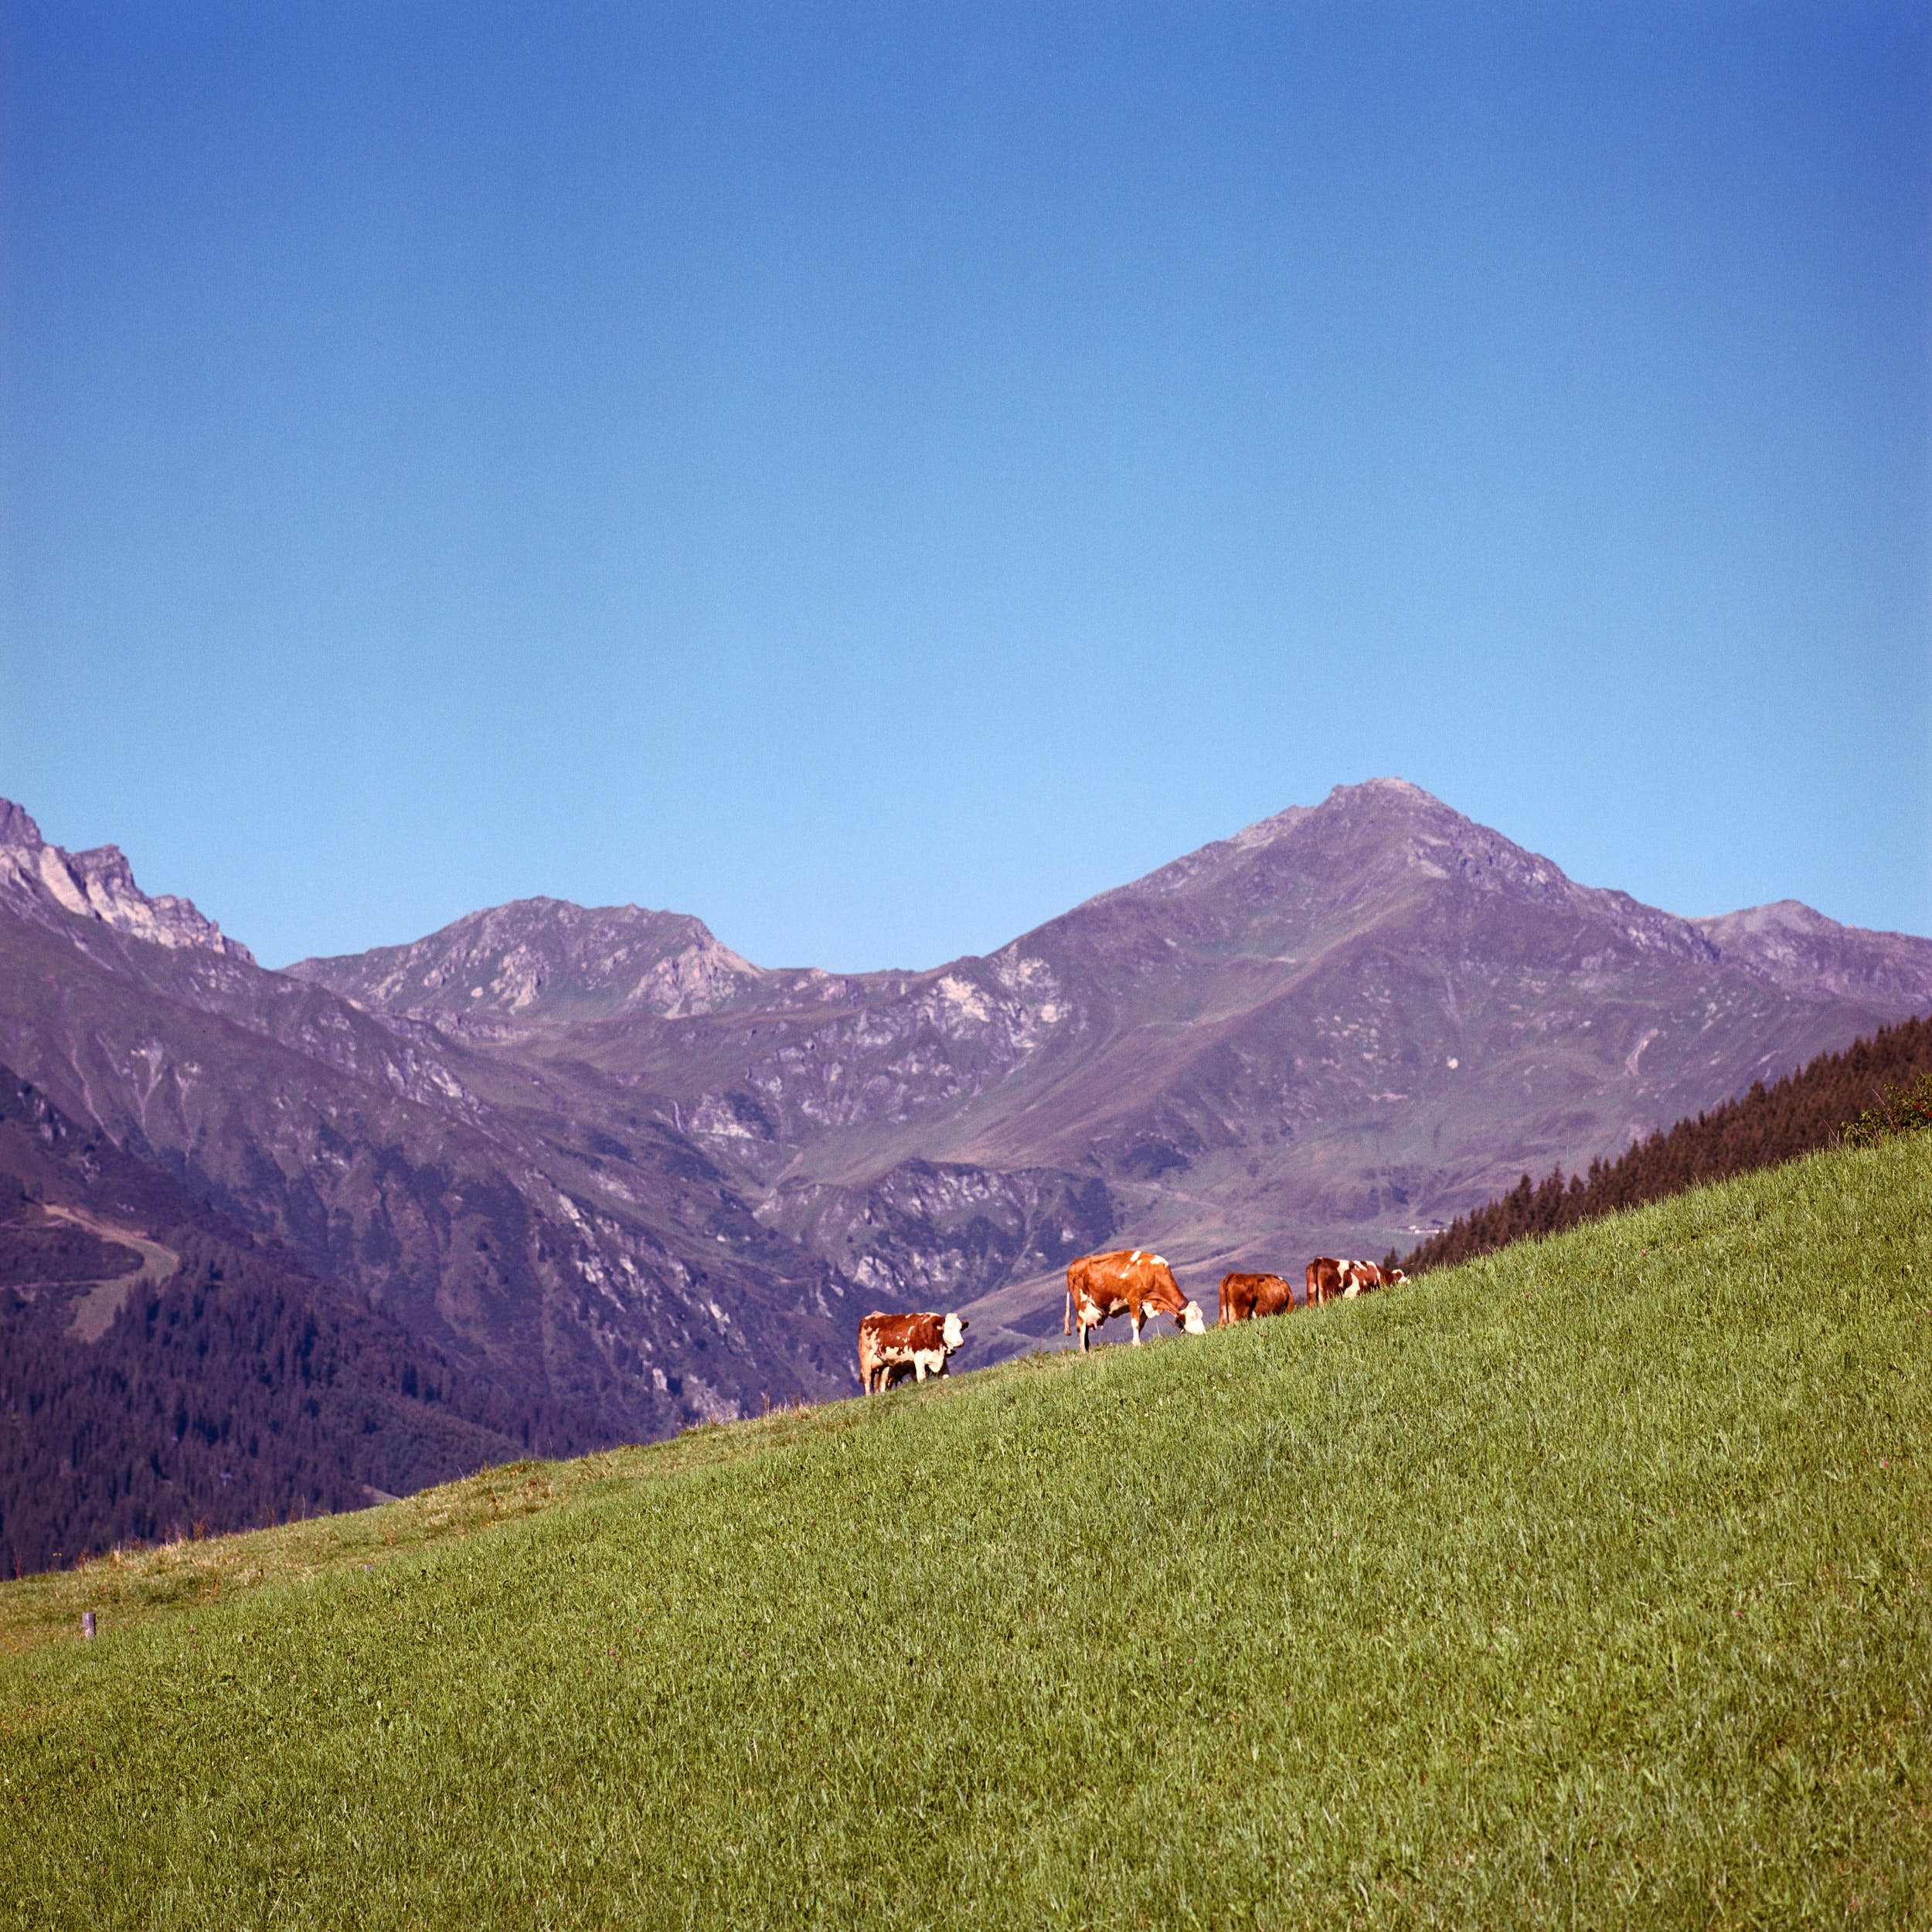 First sunlight hitting the top of alpine peaks with cows in the foreground. Shot on medium format color film.